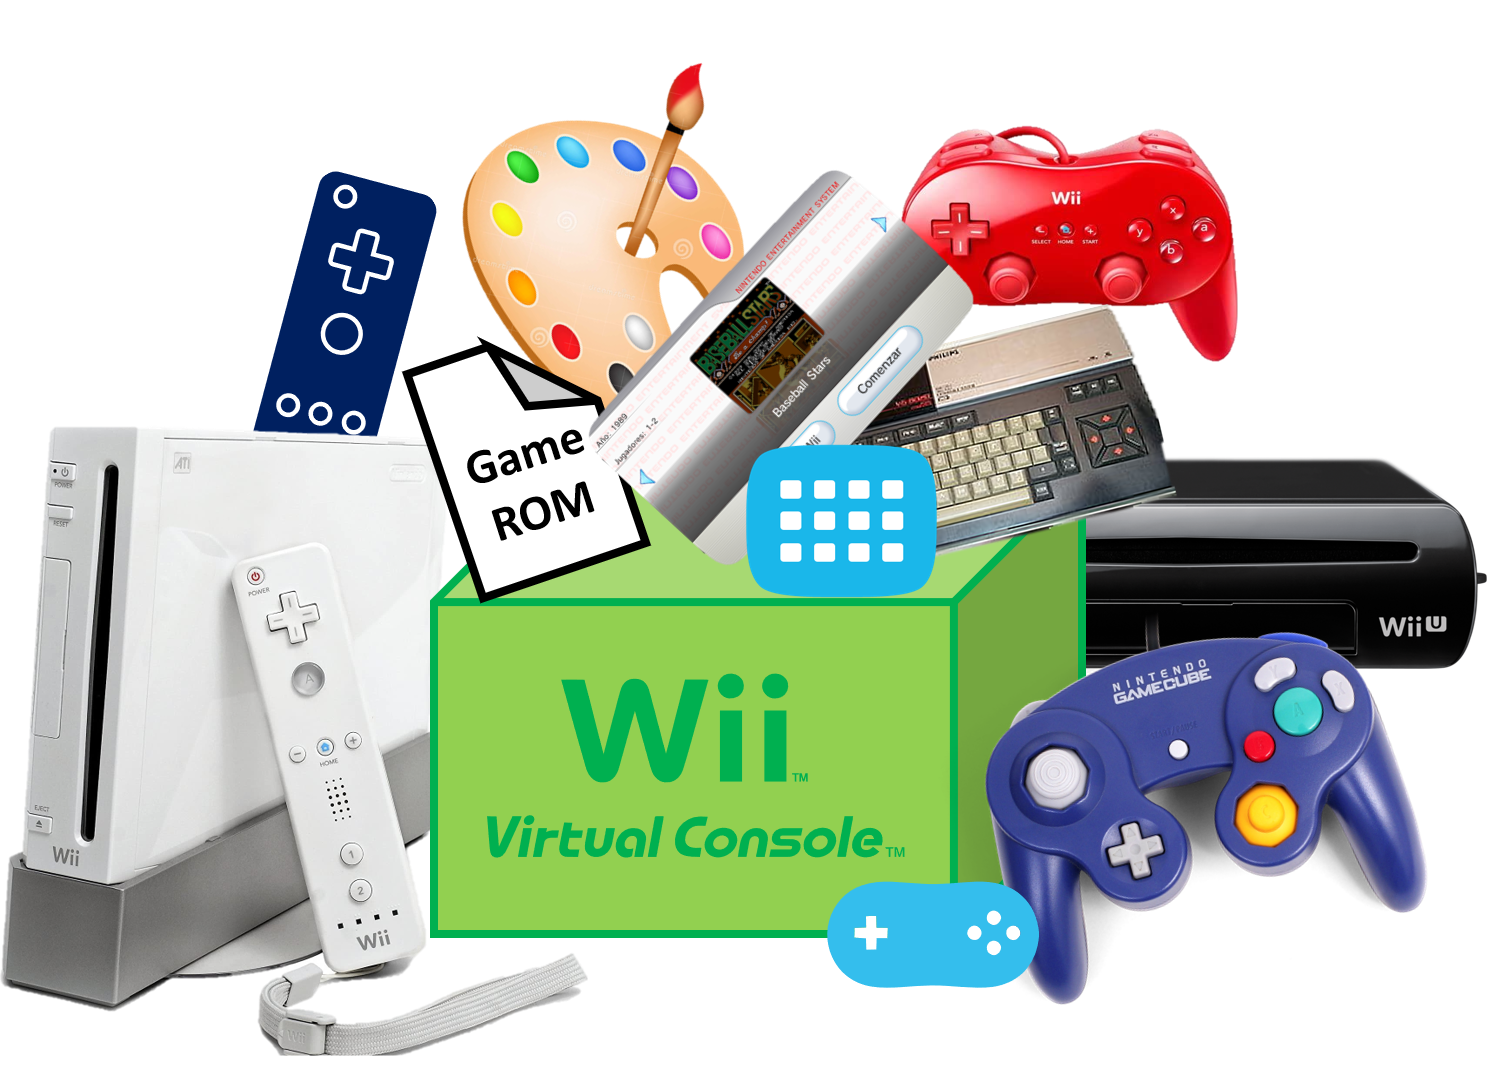 Overzicht Supersonische snelheid Te voet RELEASE] saulfabreg All-in-One Wii Virtual Console iNJECTiNG Tools (AIO Wii  VC iNJECT Tools) | GBAtemp.net - The Independent Video Game Community